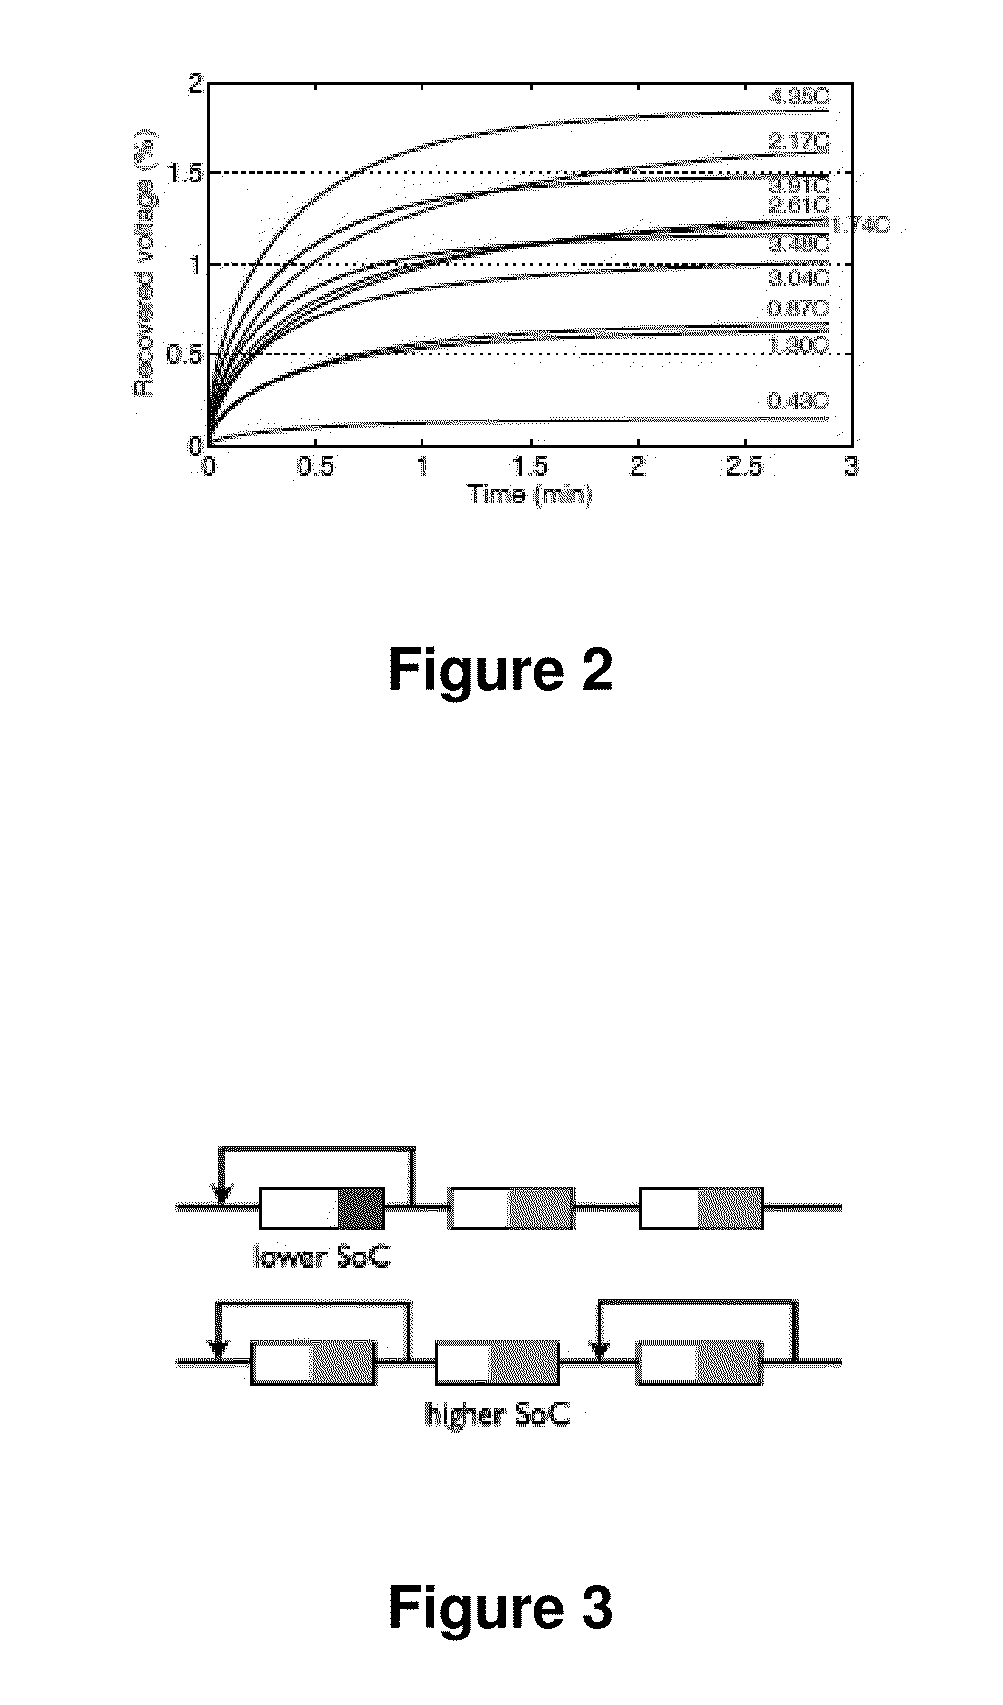 System for scheduling battery charge and discharge in a reconfigurable battery